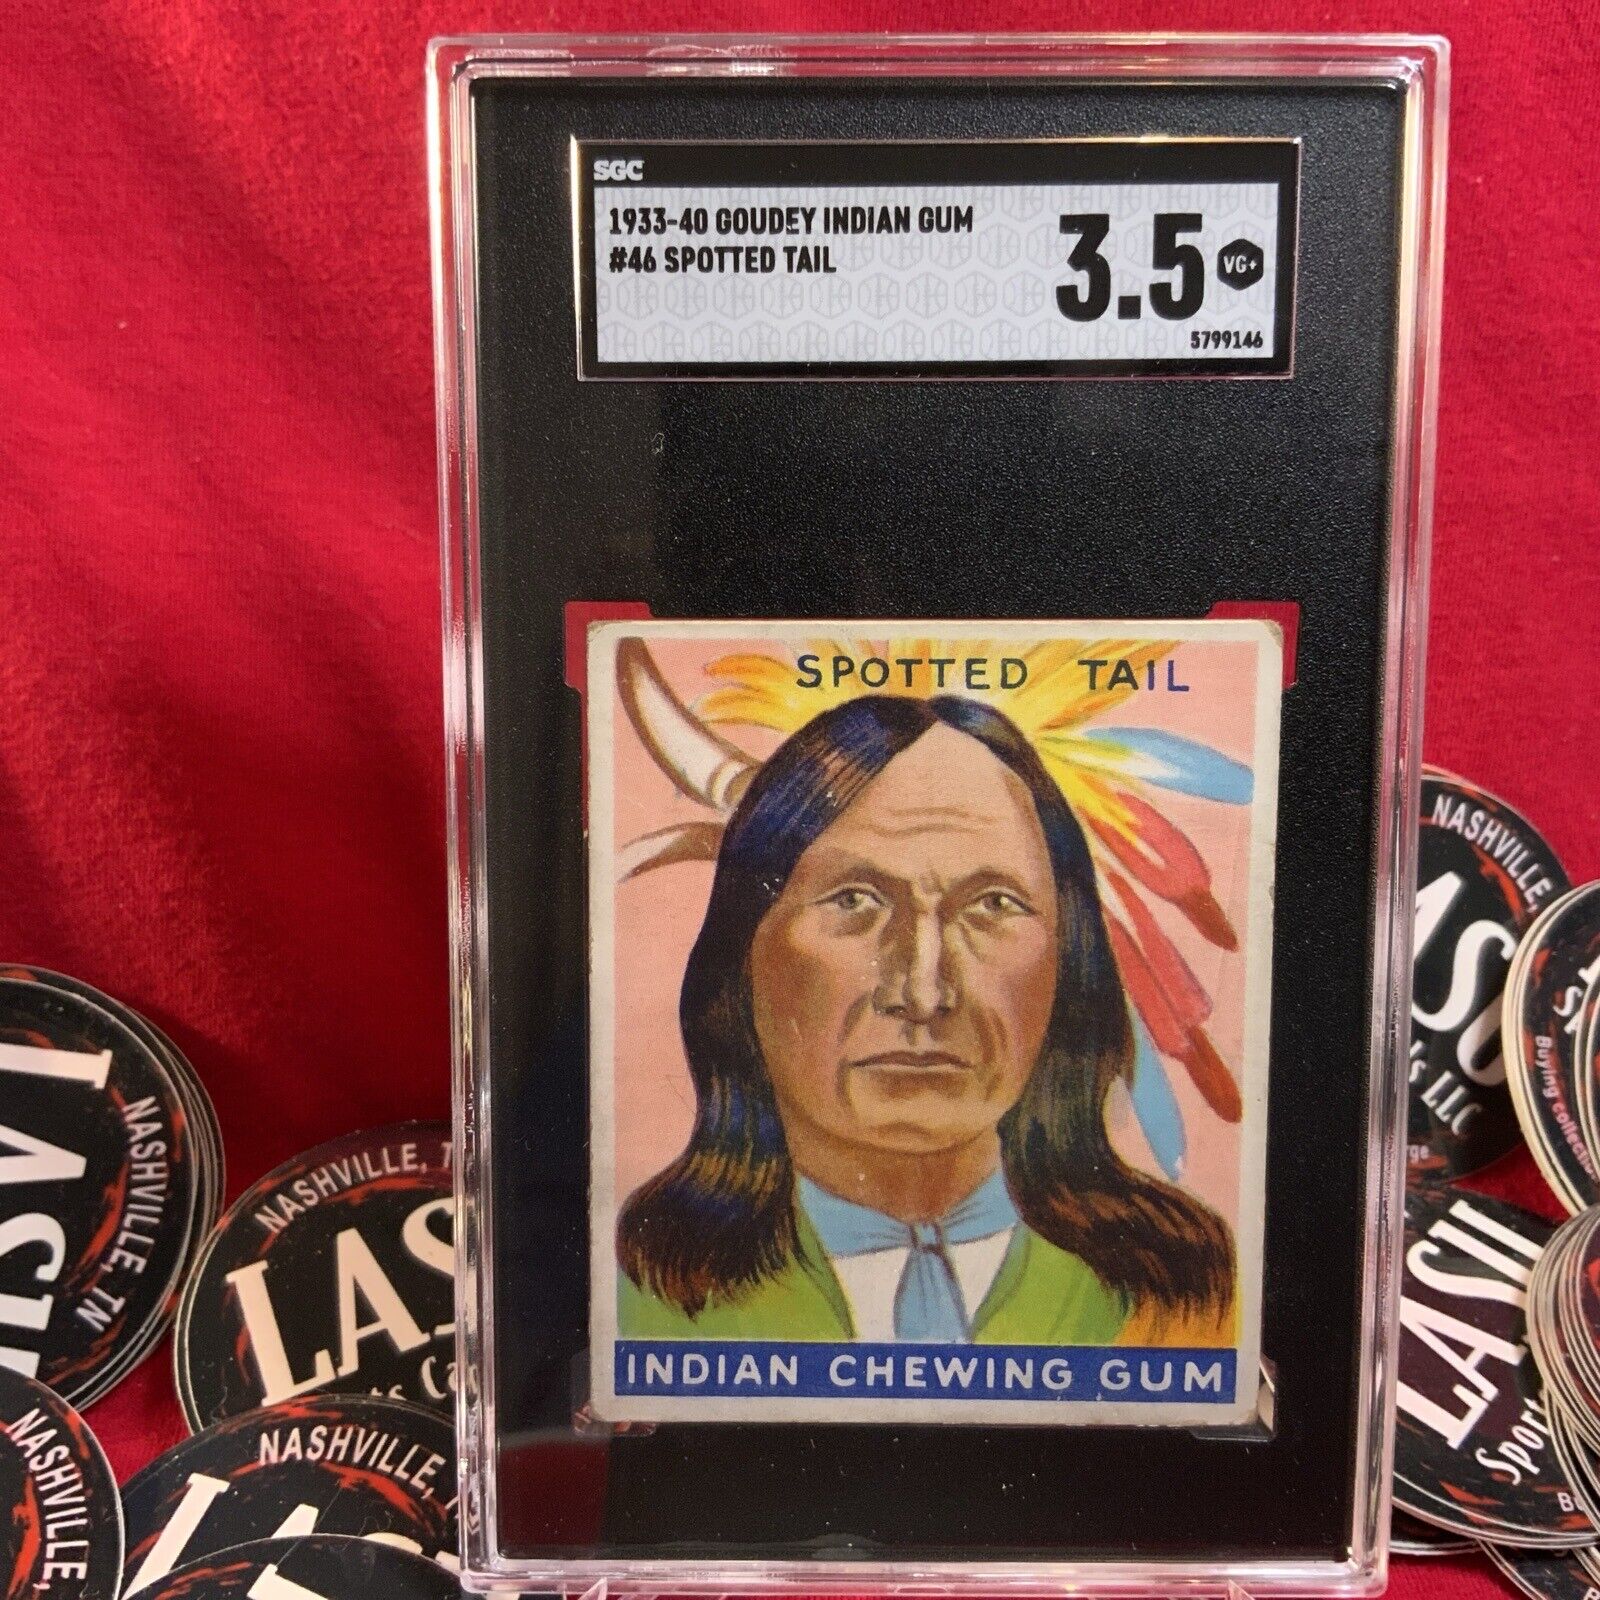 1933 GOUDEY-R73 INDIAN GUM #46 SPOTTED TAIL SGC 3.5